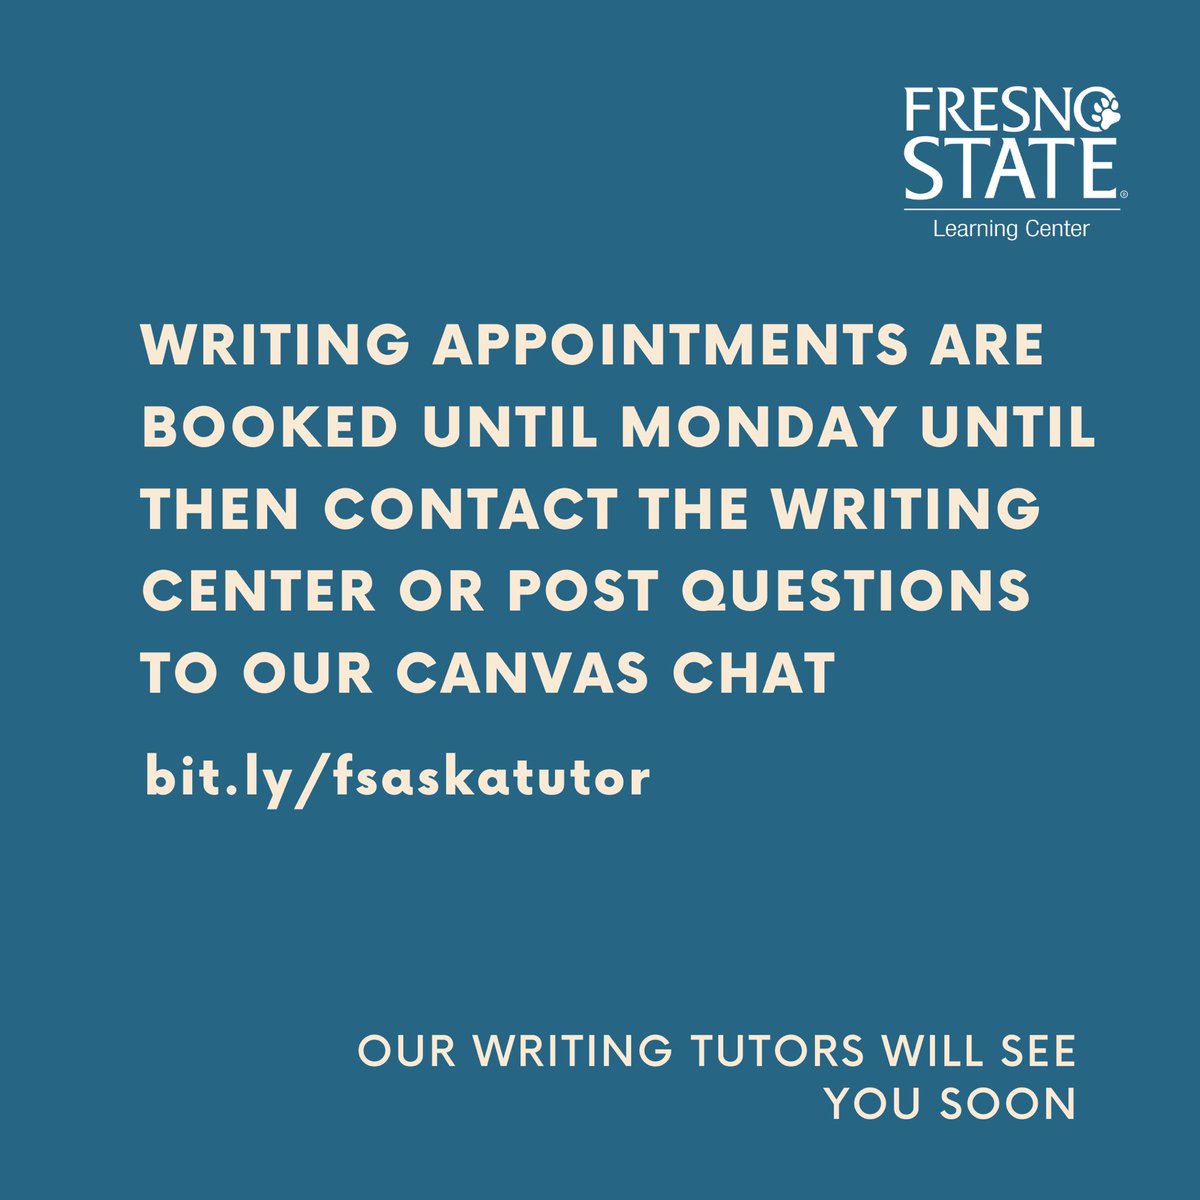 Our Writing appointments are booked until Wednesday. Reach out to the #FresnoState #education #learning #tutoring #supplementalinstruction #csu #calstate #studentaffairs #learningassistance #bulldogborn #bulldogbred #godogs #bulldogpride